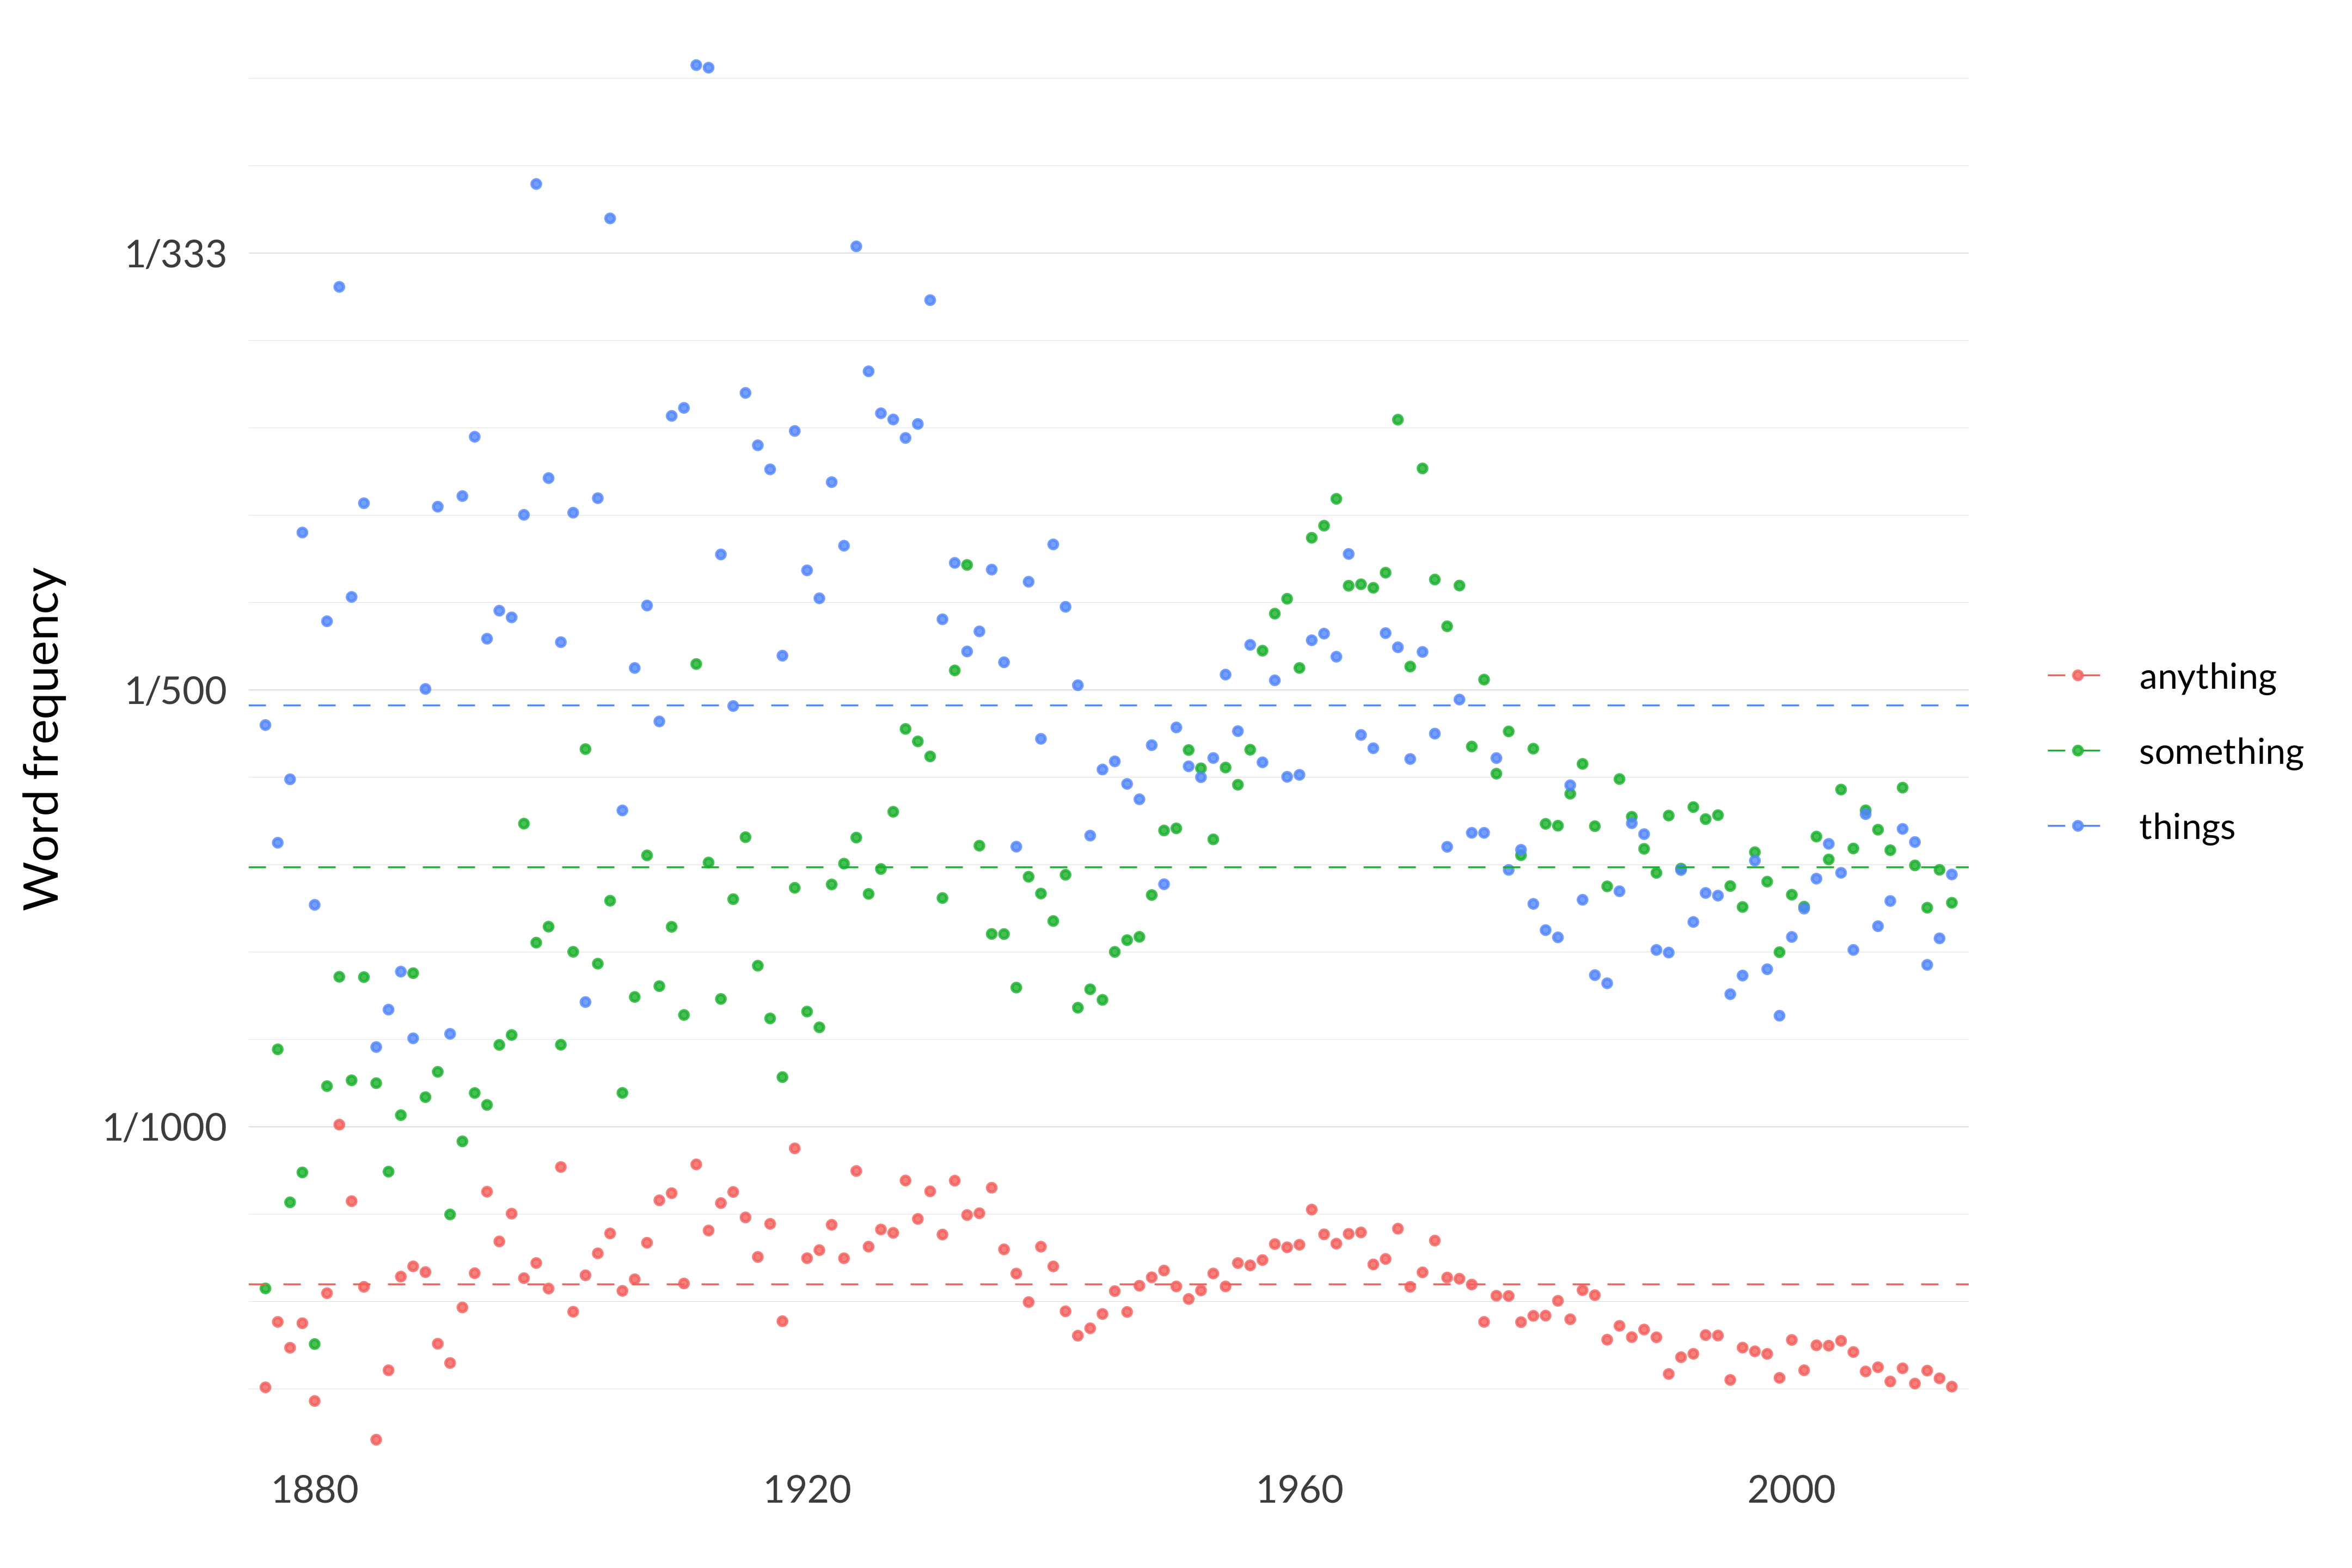 A scatterplot showing the frequency of words about quantification (_anything_, _something_, and _things_) in journal articles from 1880 to after 2000. _Anything_ is the least frequent throughout most of the time span. All three words show a peak in frequency around 1960, though the peak is more pronounced for _something_ and _things.'